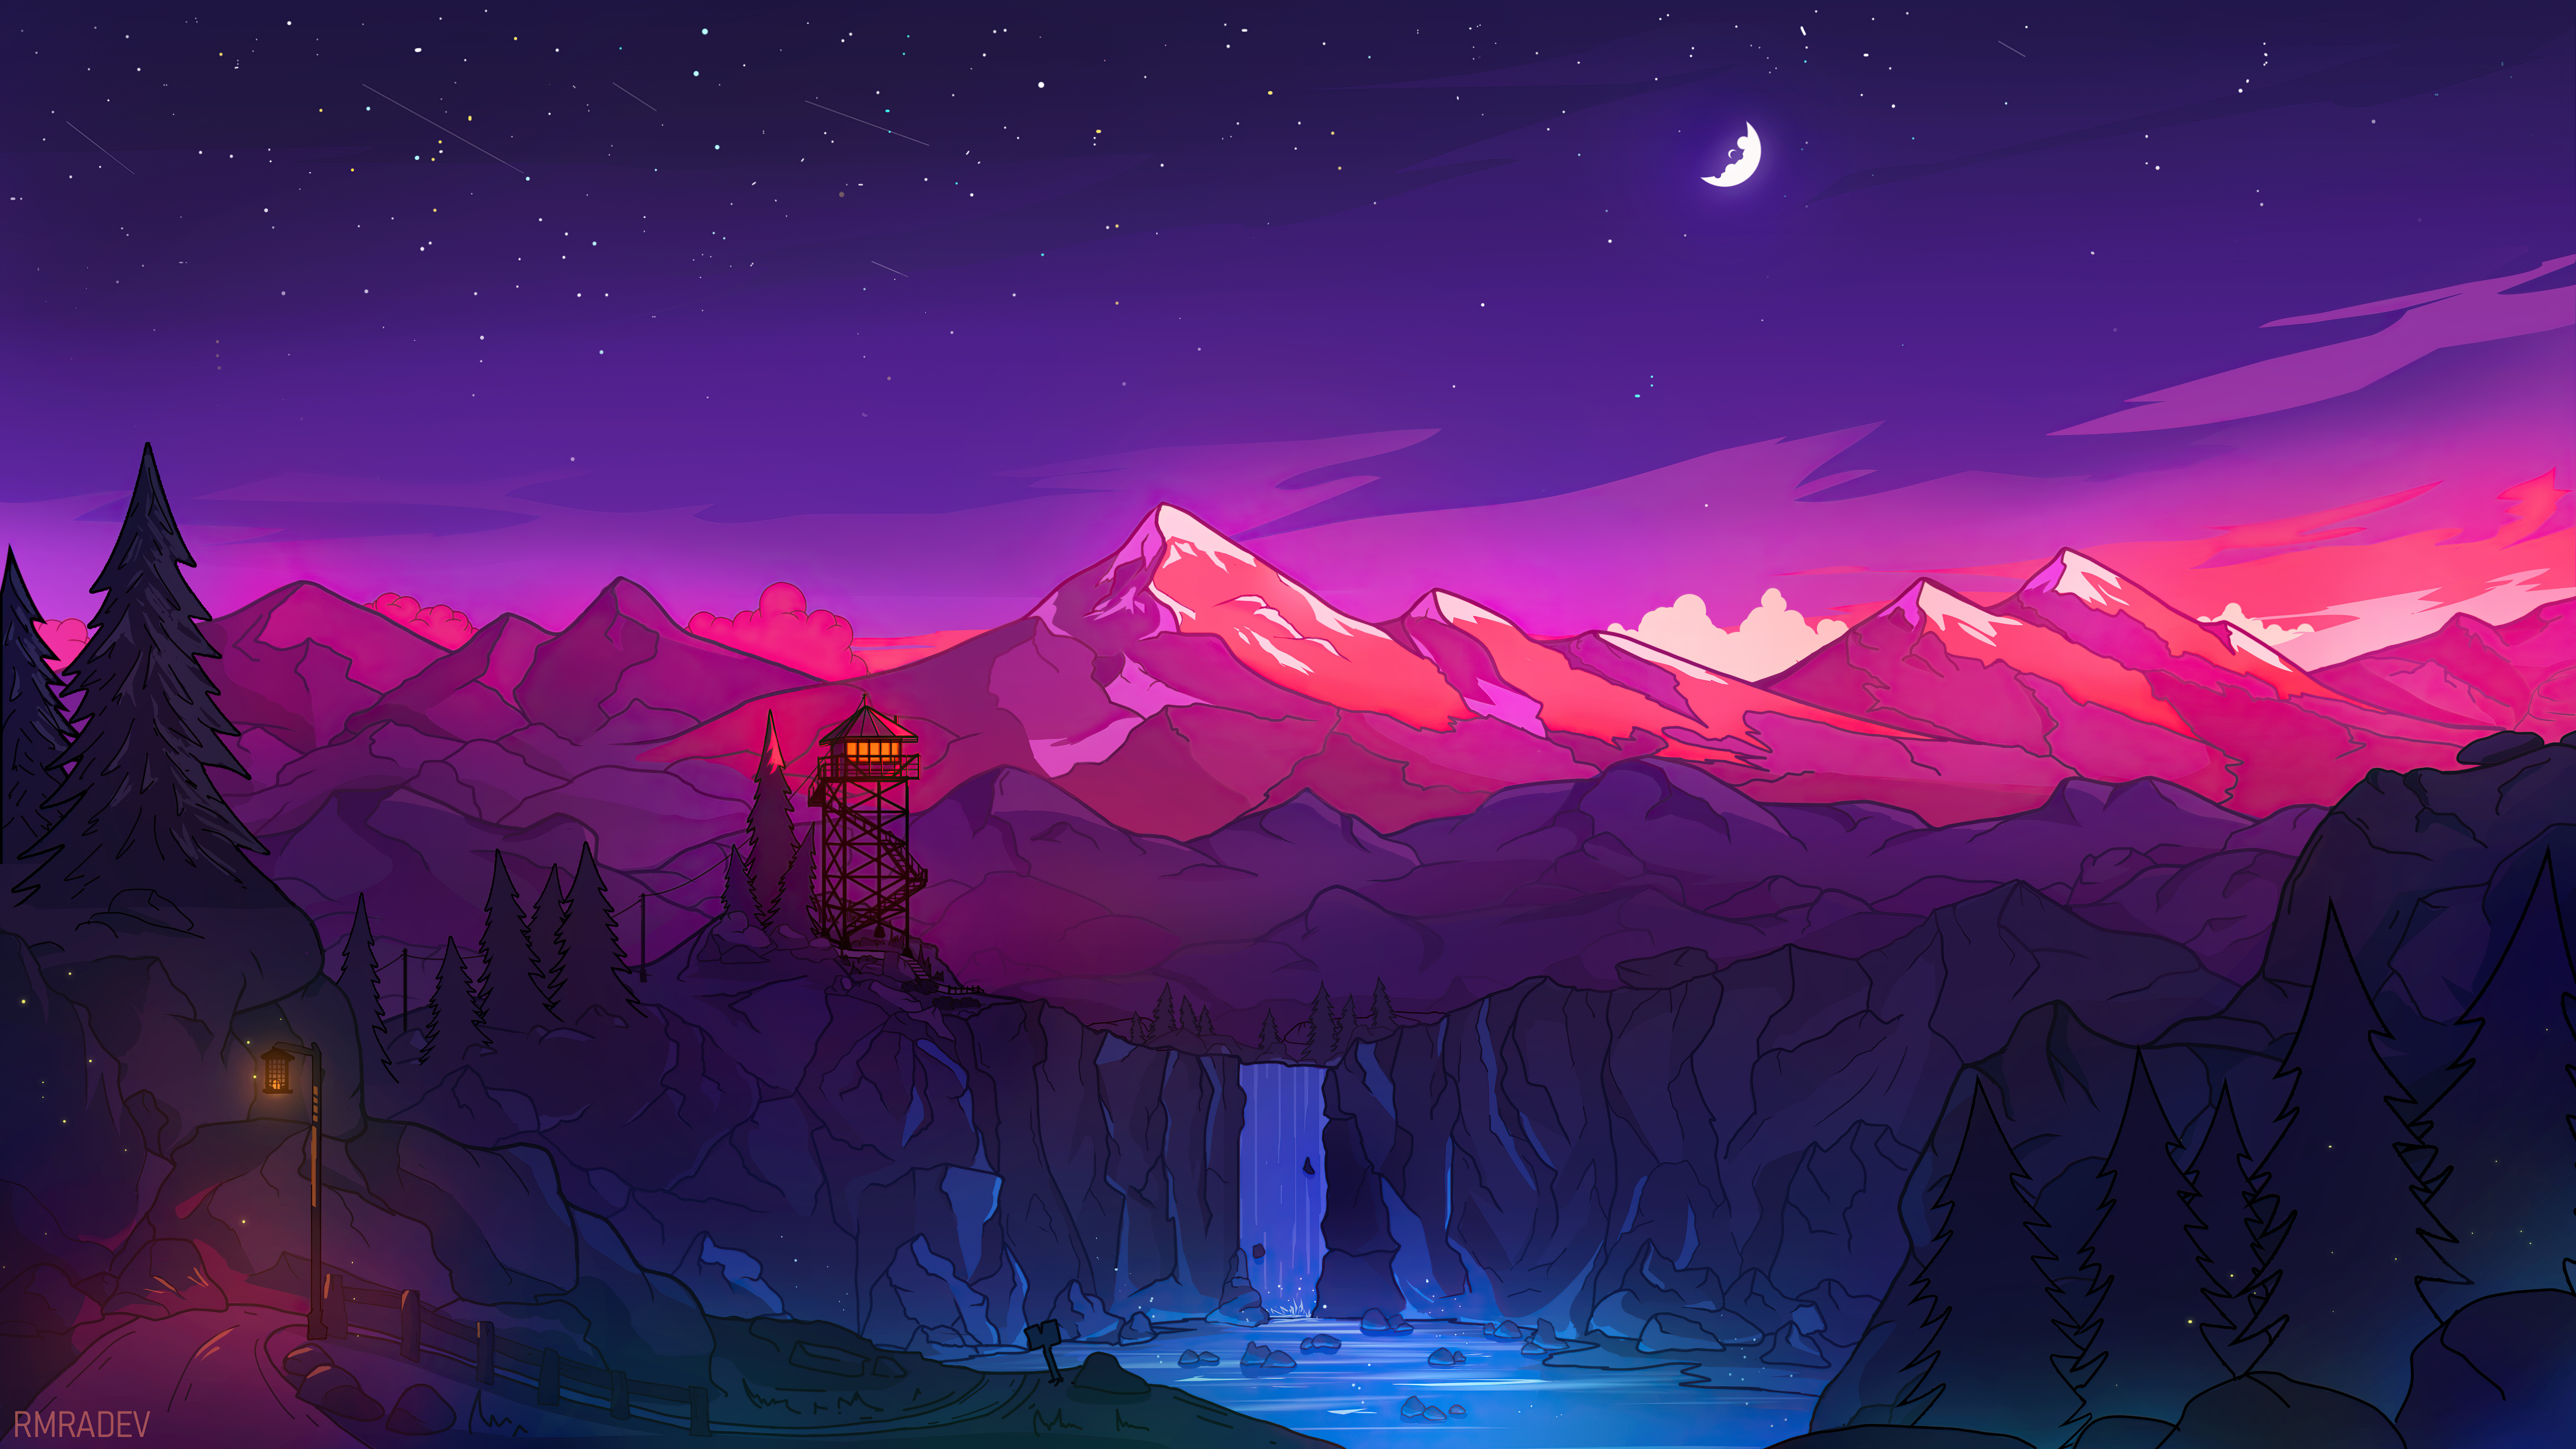 Colorful night in the mountains Digital Art Wallpaper 8k Ultra HD ID:8485